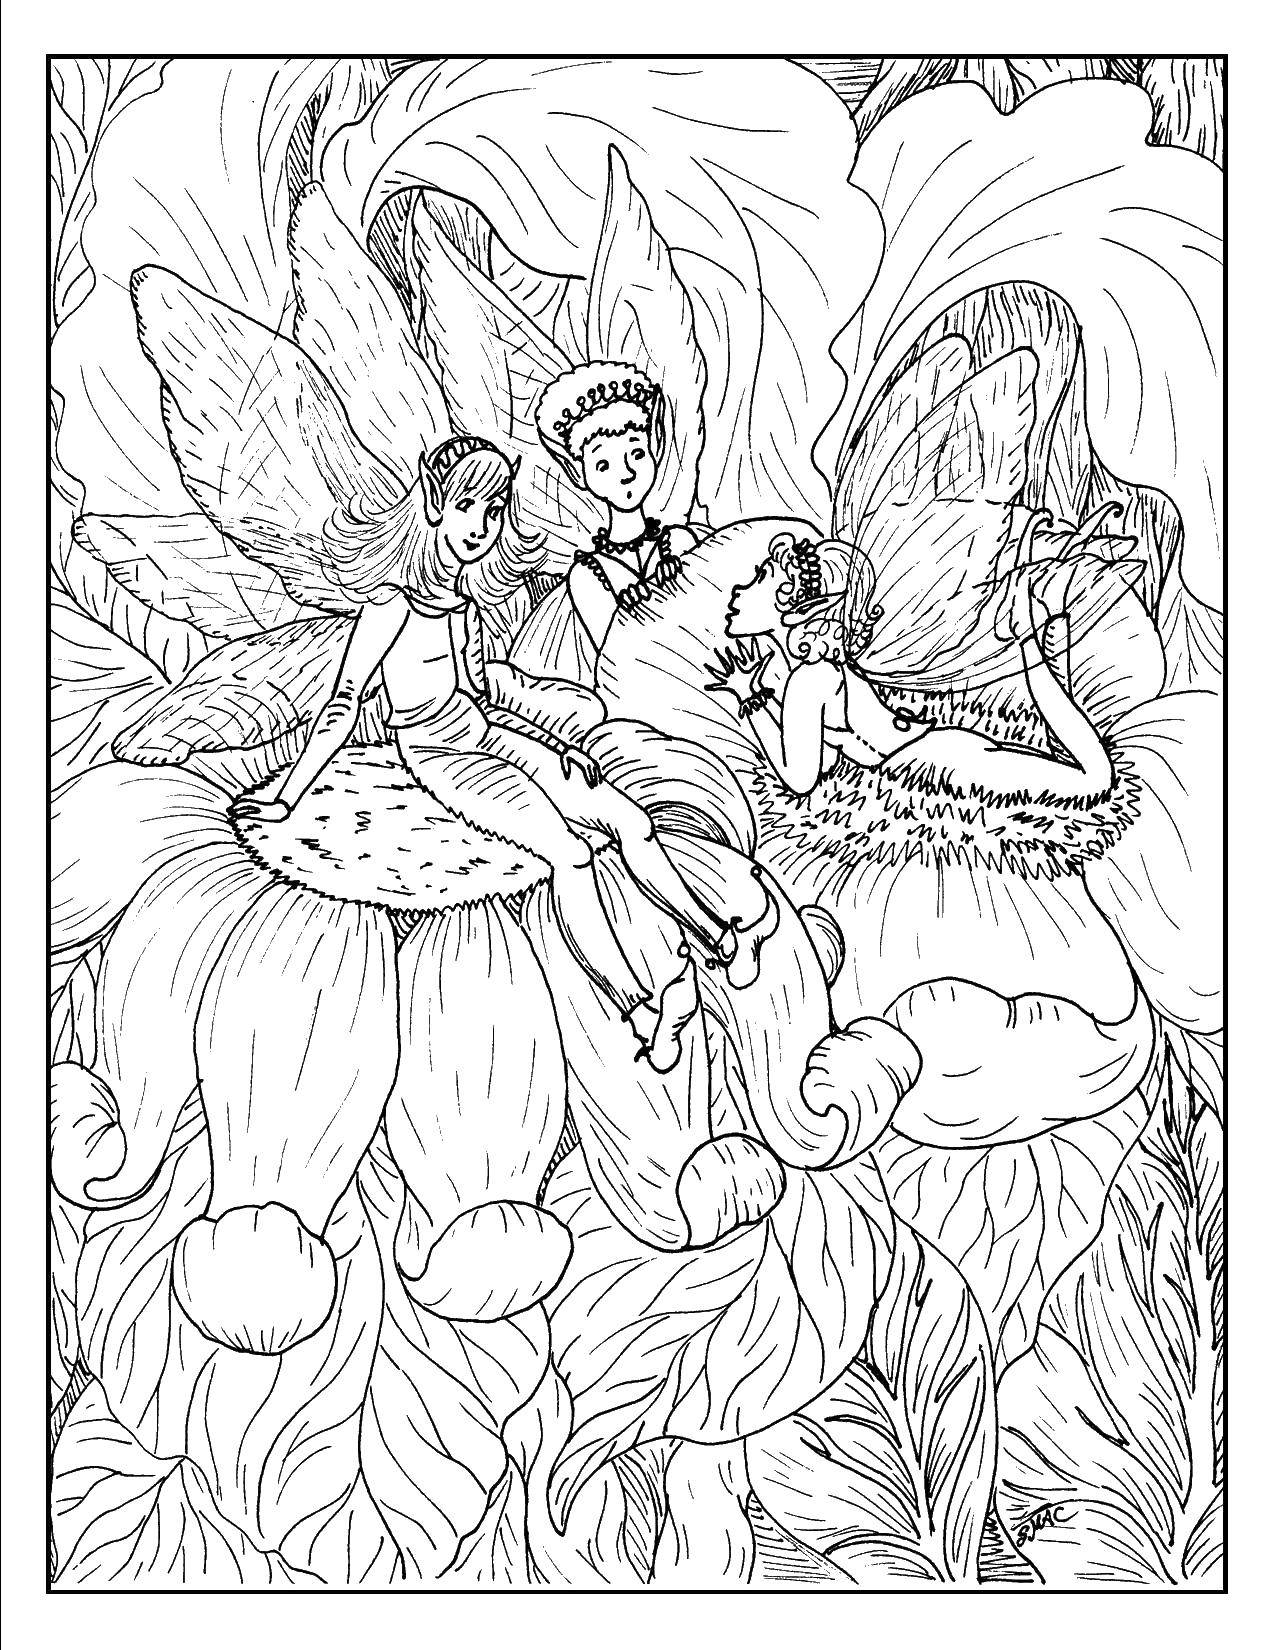 Coloring The three good fairies in the flowers. Category fiction. Tags:  fairies , flowers, wings.